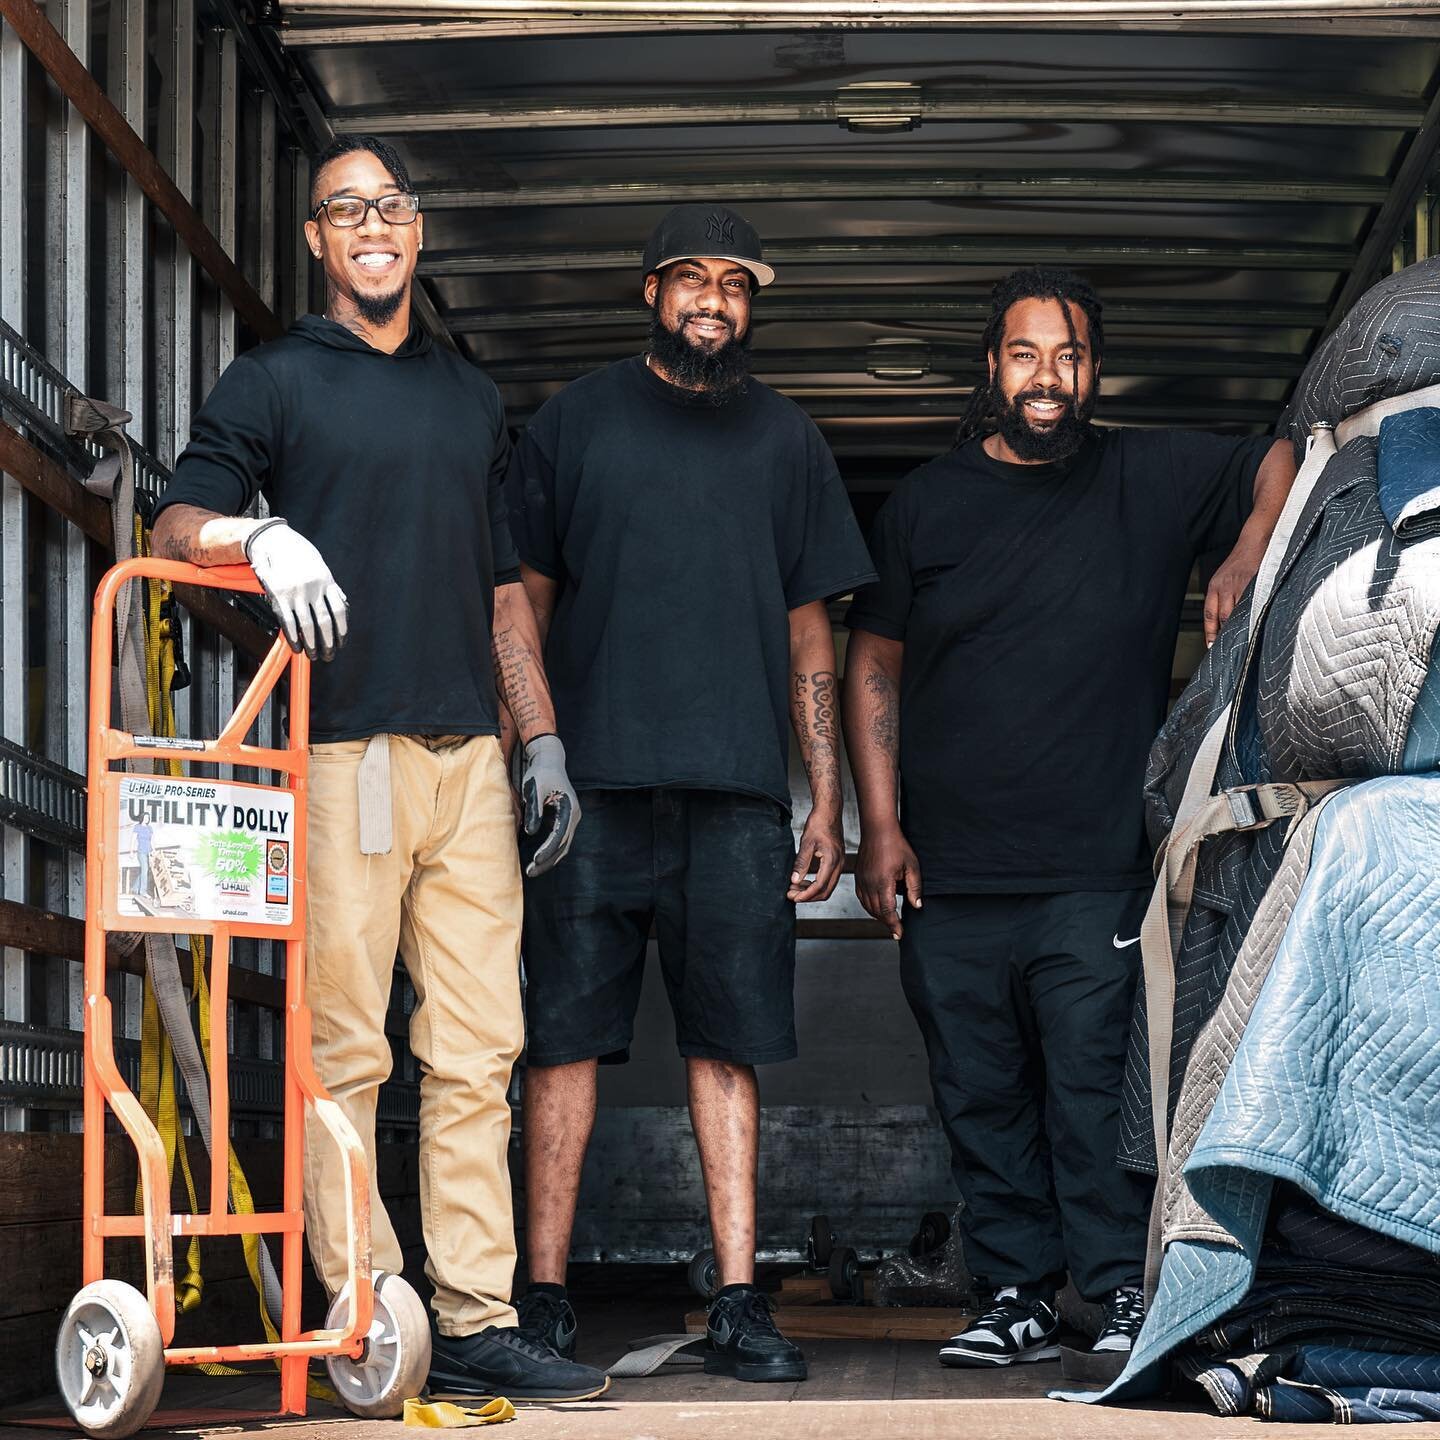 Meet our amazing team members and moving crew! Odell, Will and Corey. Efficient, hardworking and respectful, they are instrumental in our promise to keep each project moving forward at a markedly more productive rate than others in the industry. #sta